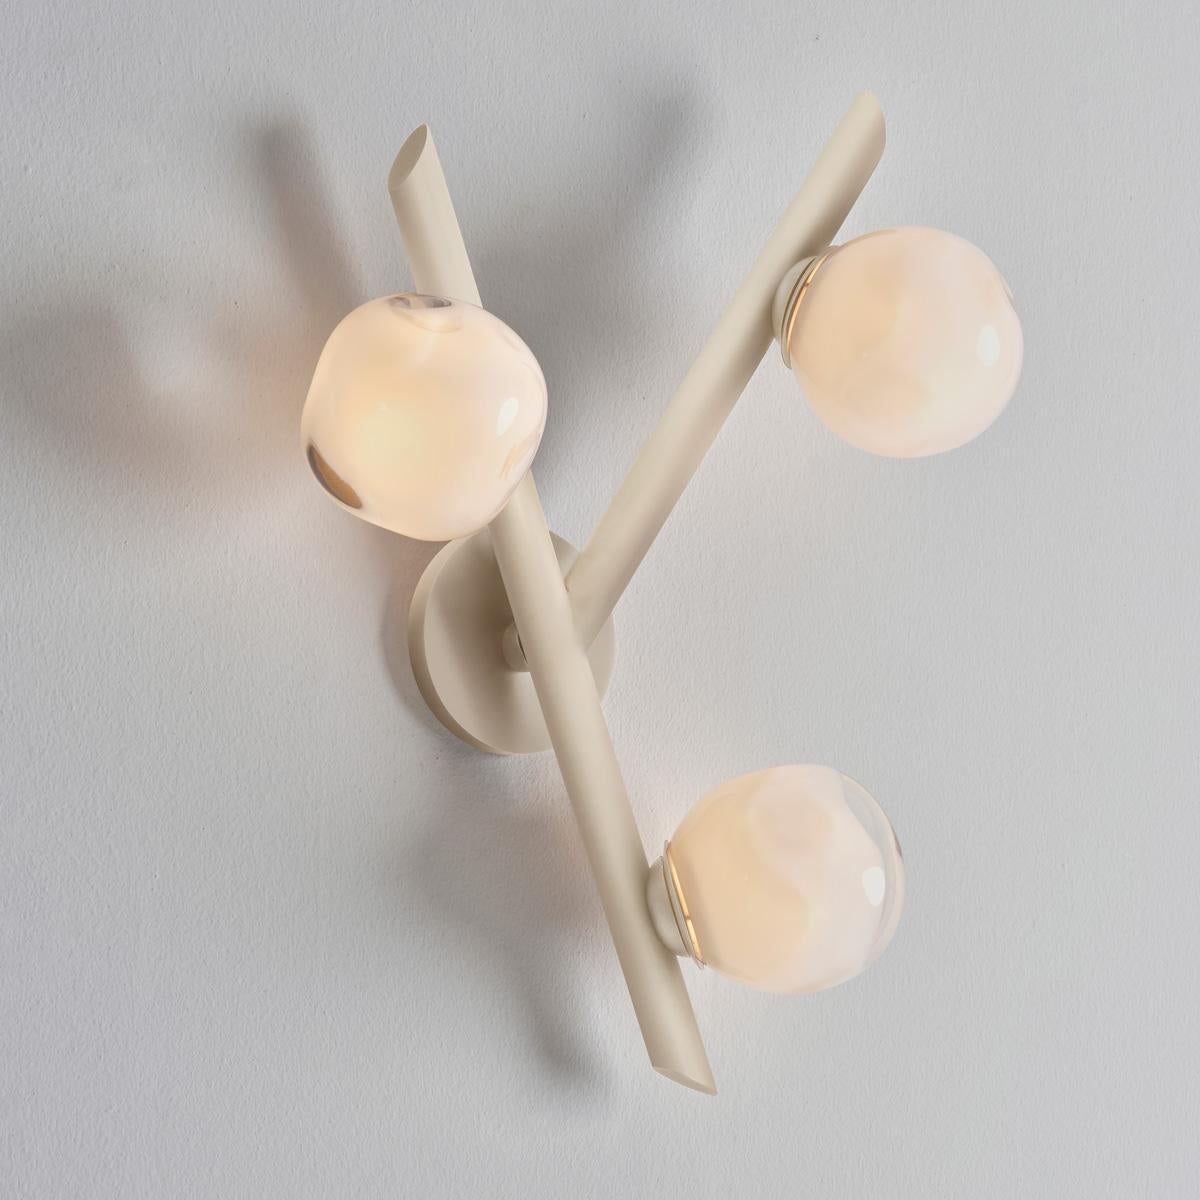 The Antares wall light harmoniously balances the linear details of its intersecting arms with the organic form of its handblown glass shades. The first images show the fixture in our Sand White finish-subsequent pictures show it in a selection of